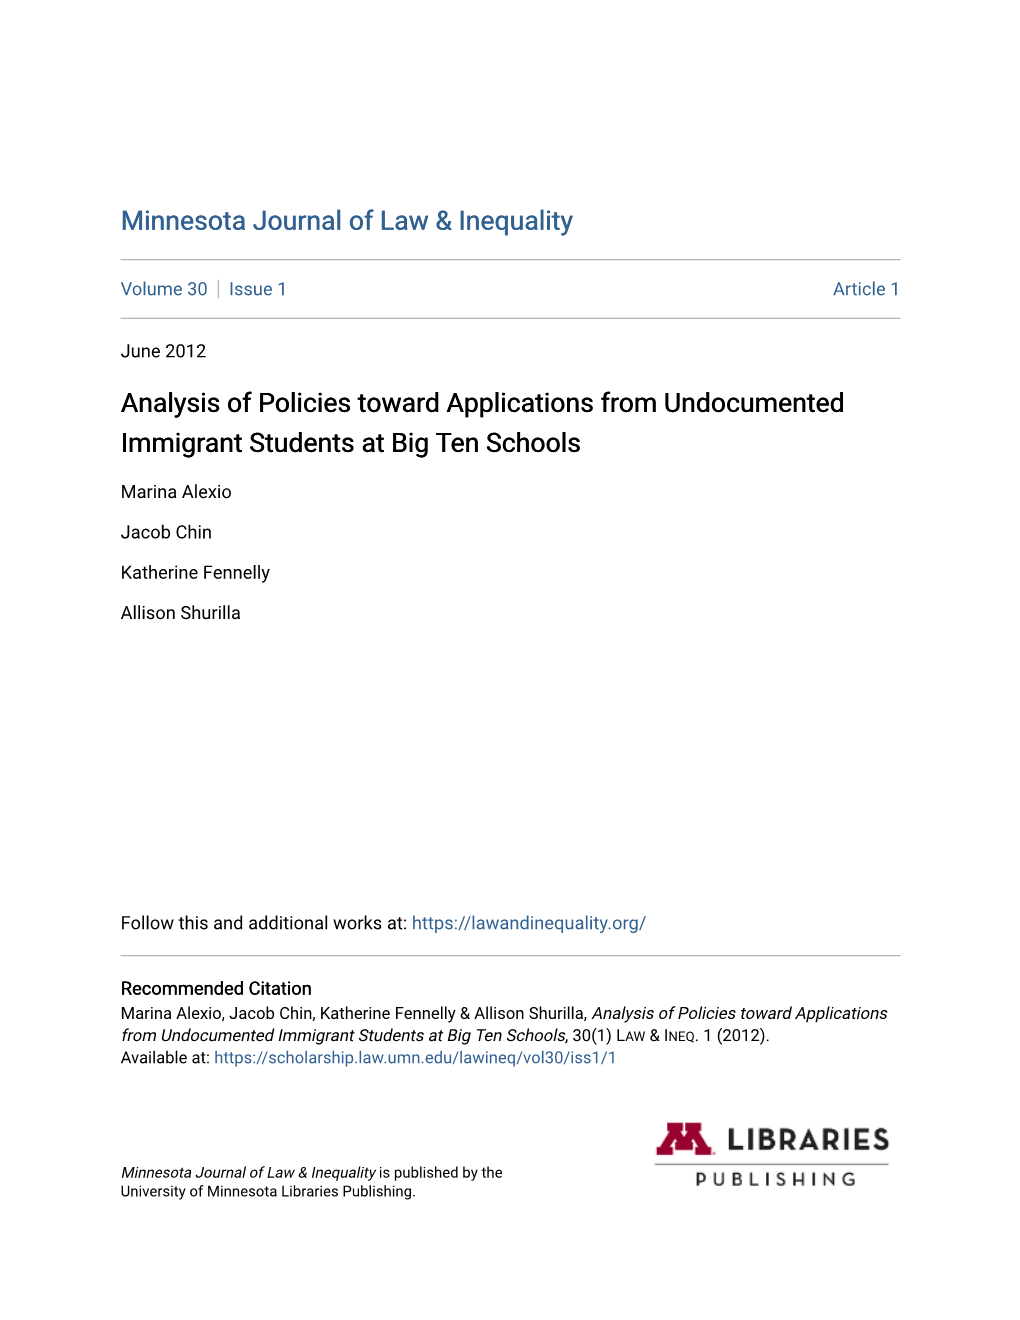 Analysis of Policies Toward Applications from Undocumented Immigrant Students at Big Ten Schools